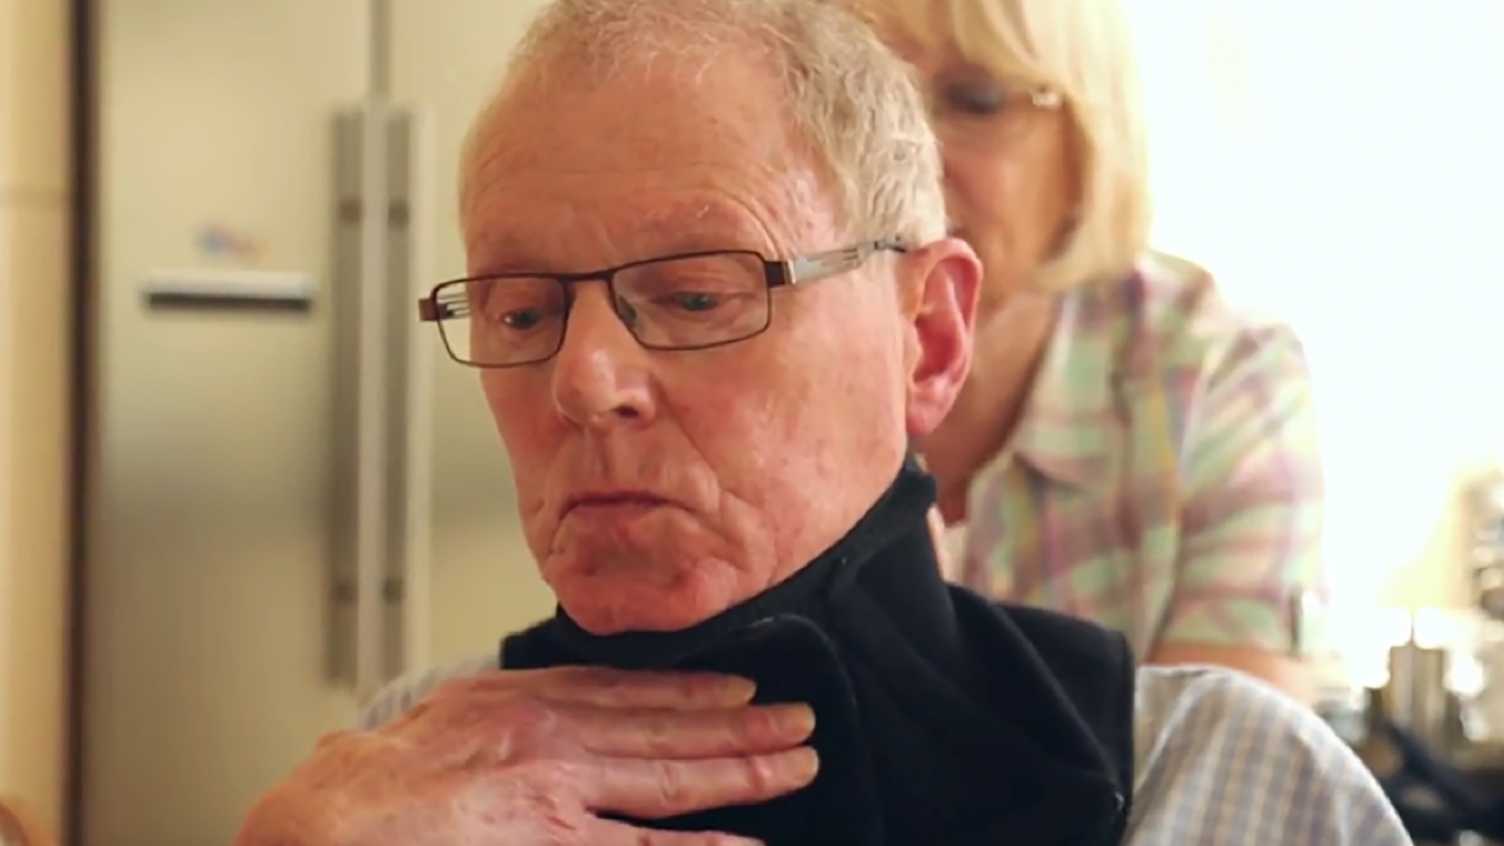 Thumbnail for Revolutionary neck support technology transforms lives of MND patients | Medicin…